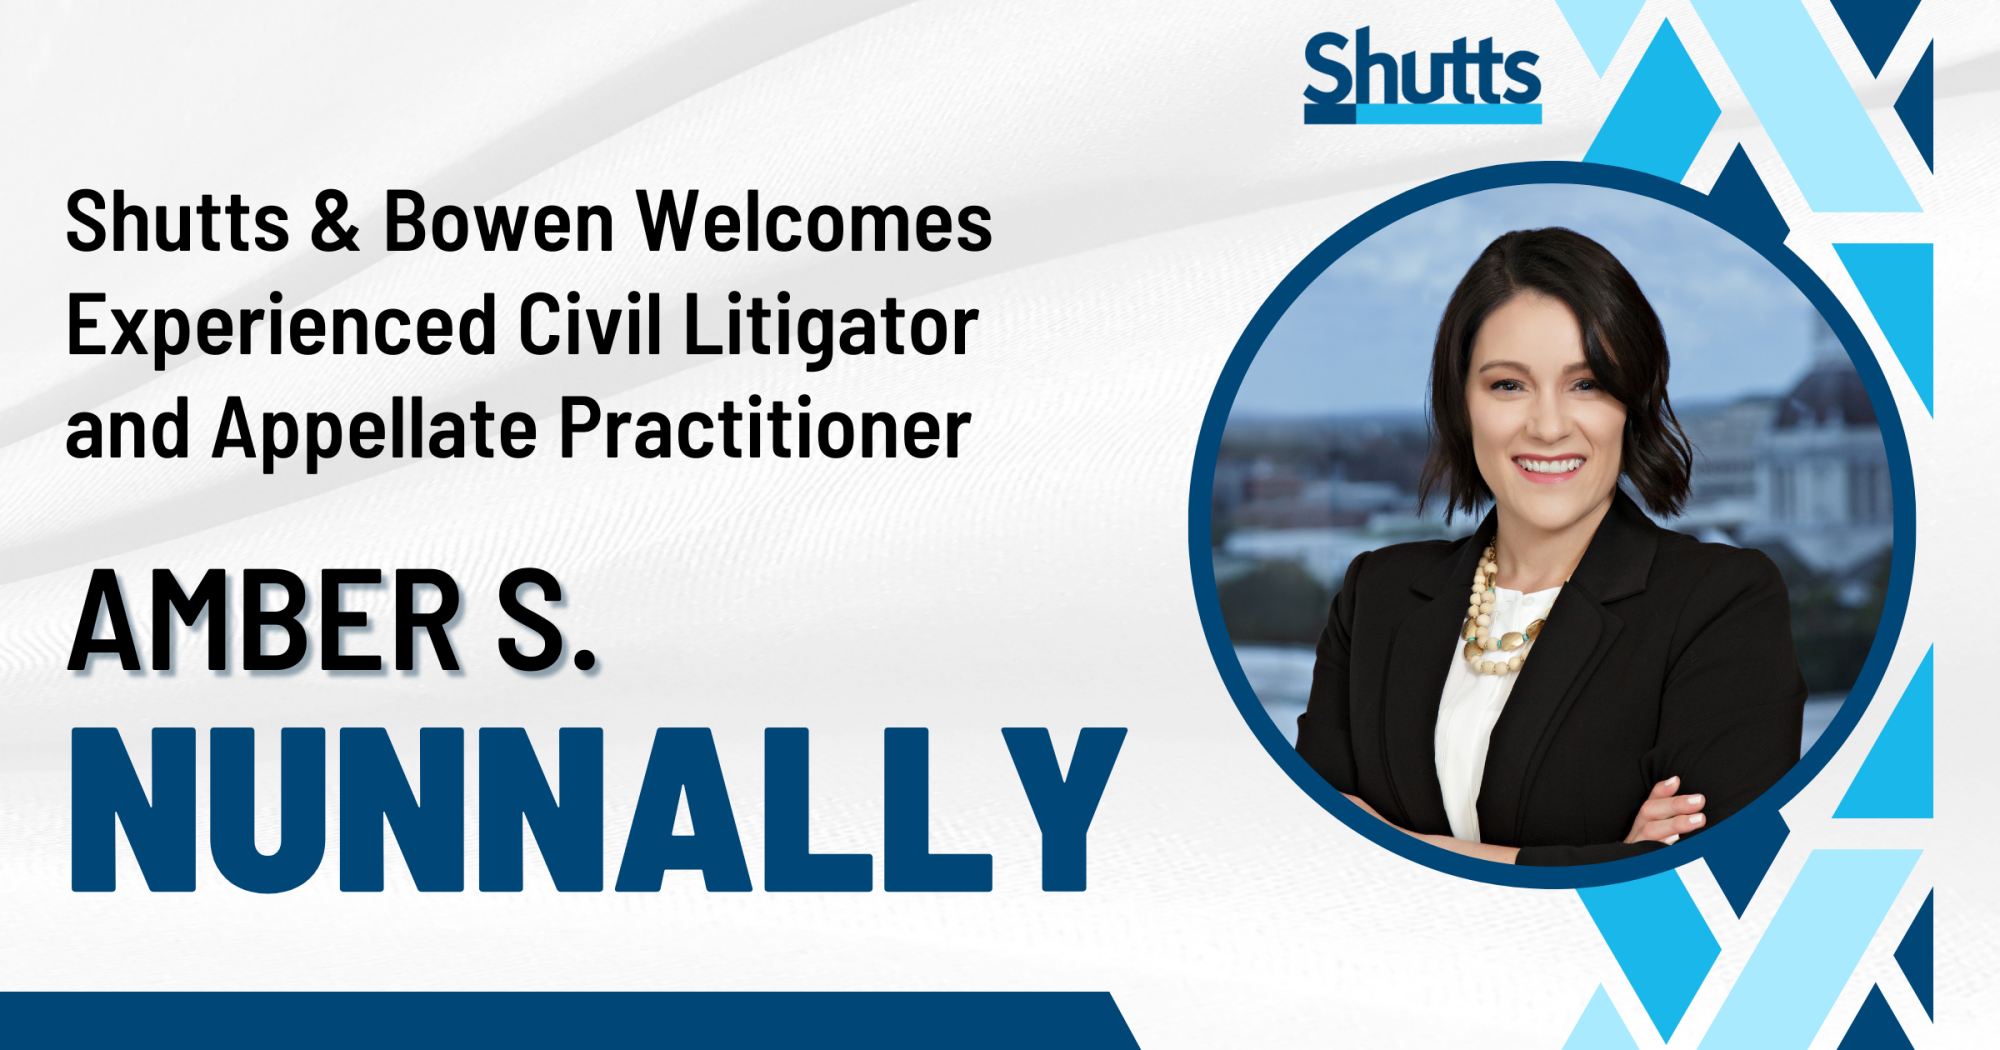 Shutts & Bowen Welcomes Experienced Civil Litigator and Appellate Practitioner Amber S. Nunnally